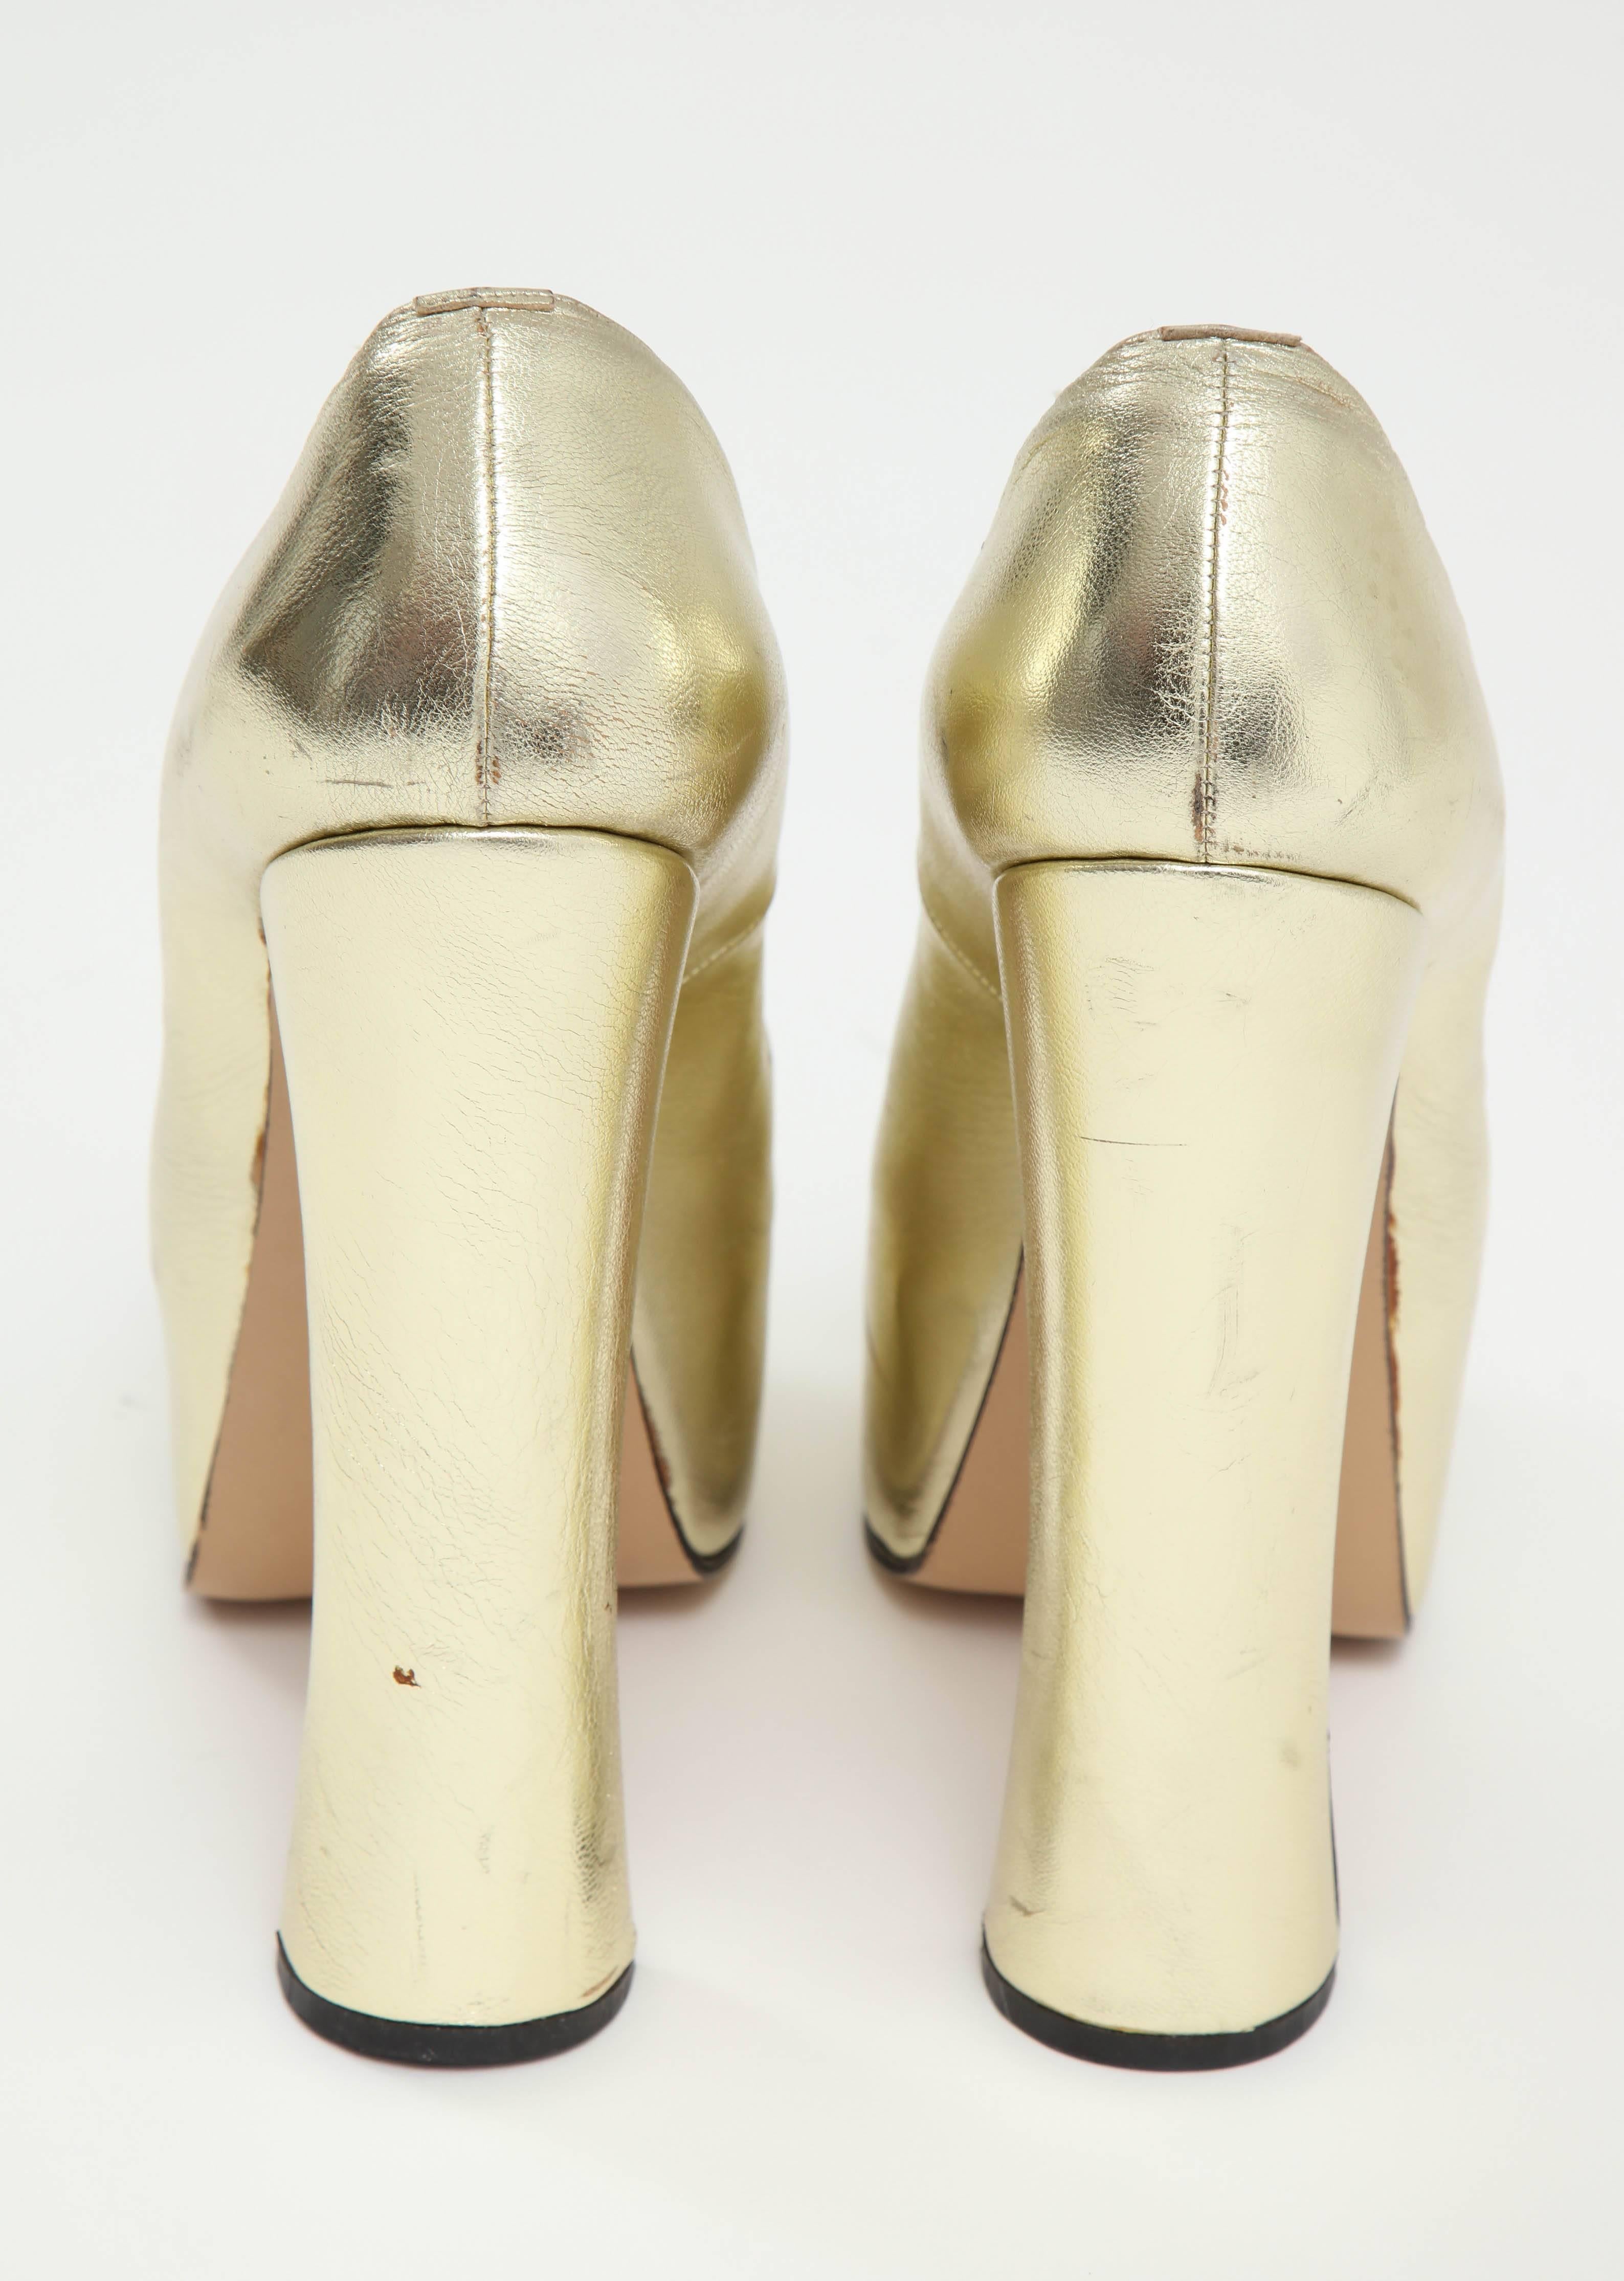 Late 20th Century Iconic Rare Pair of Vivienne Westwood Shoes For Sale